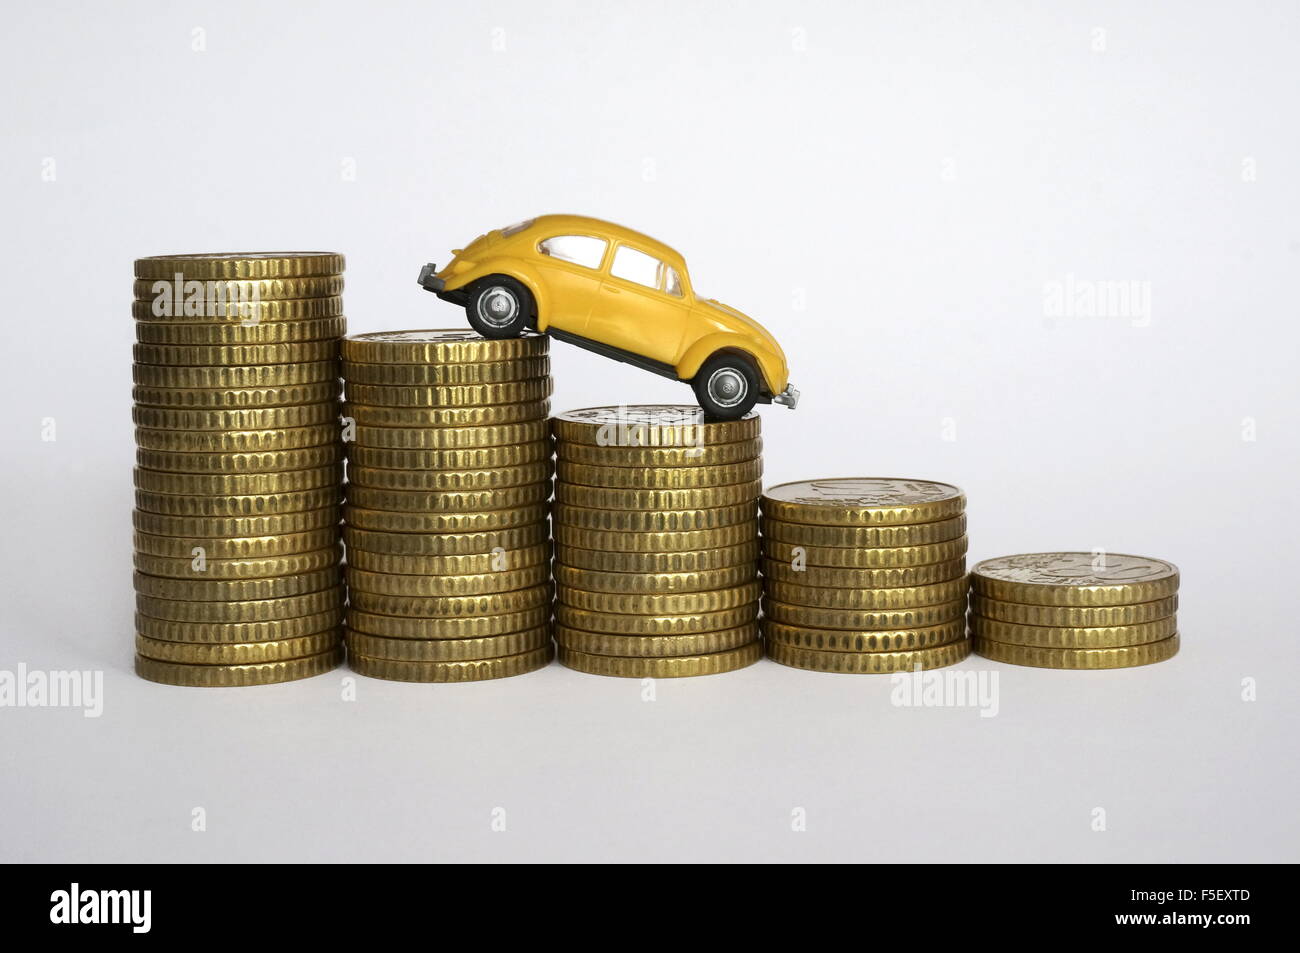 ILLUSTRATION - A Volkswagen Beetle model on decreasing money piles. The photo was taken on 06 October 2015. Photo: S. Steinach - NO WIRE SERVICE - Stock Photo